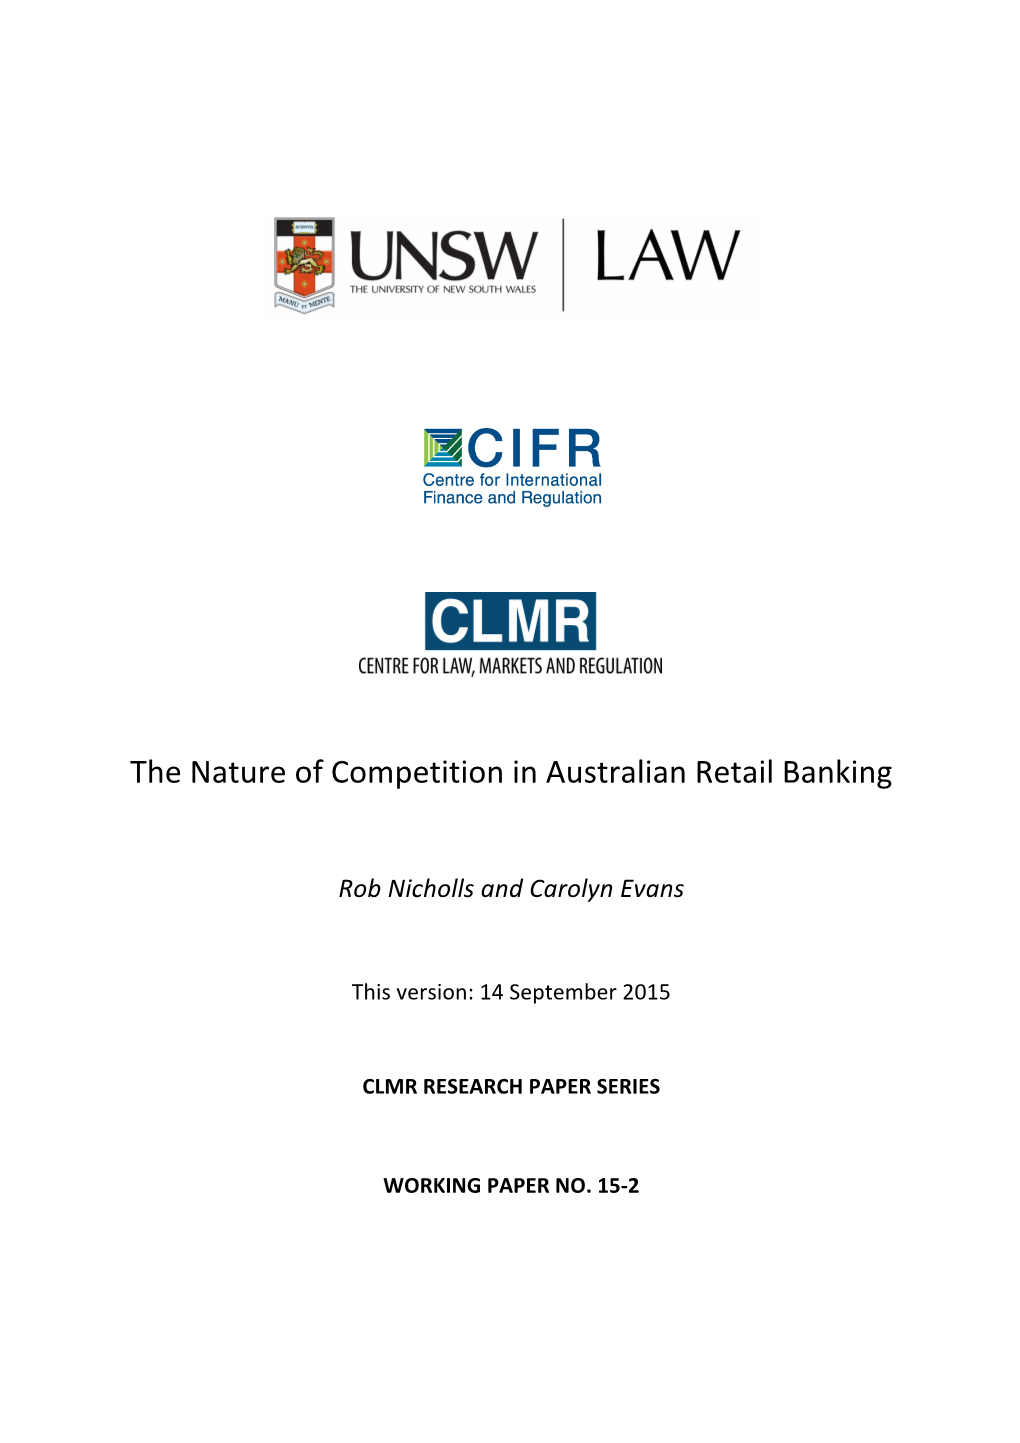 The Nature of Competition in Australian Retail Banking